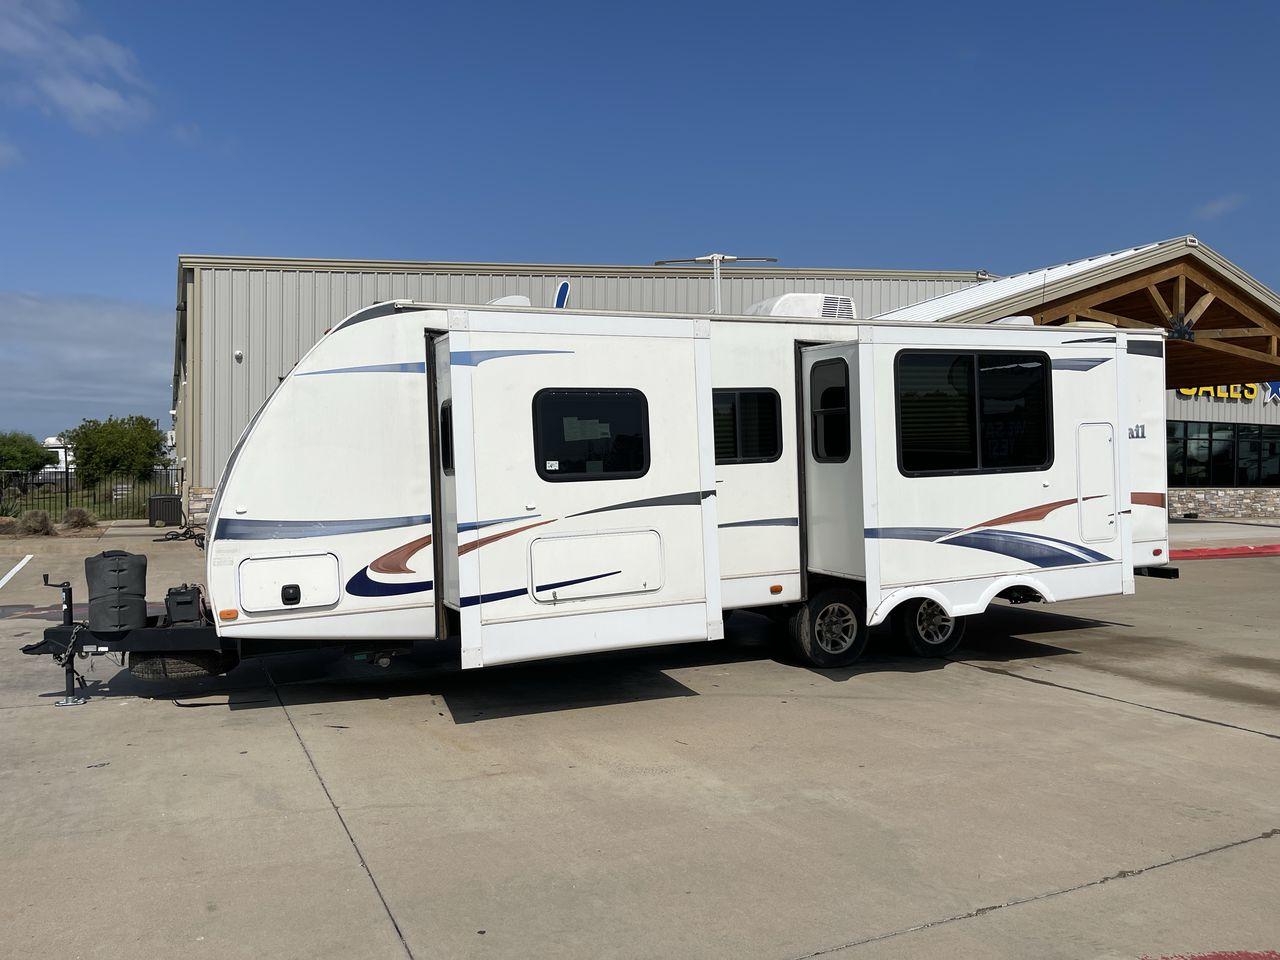 2011 WHITE HEARTLAND NORTH TRAIL 26B (5SFNB3225BE) , Length: 32.5 ft. | Dry Weight: 7,104 lbs. | Gross Weight: 8,600 lbs. | Slides: 2 transmission, located at 4319 N Main Street, Cleburne, TX, 76033, (817) 221-0660, 32.435829, -97.384178 - Enjoy a spontaneous weekend getaway in this 2011 Heartland North Trail 26BRSS Travel Trailer! It is a dual-axle steel wheel setup measuring 32.5 ft. in length and 10.83 ft. in height. It has a dry weight of 7,104 lbs. and a GVWR of 8,600 lbs. It is equipped with automatic heating and cooling rated a - Photo #22